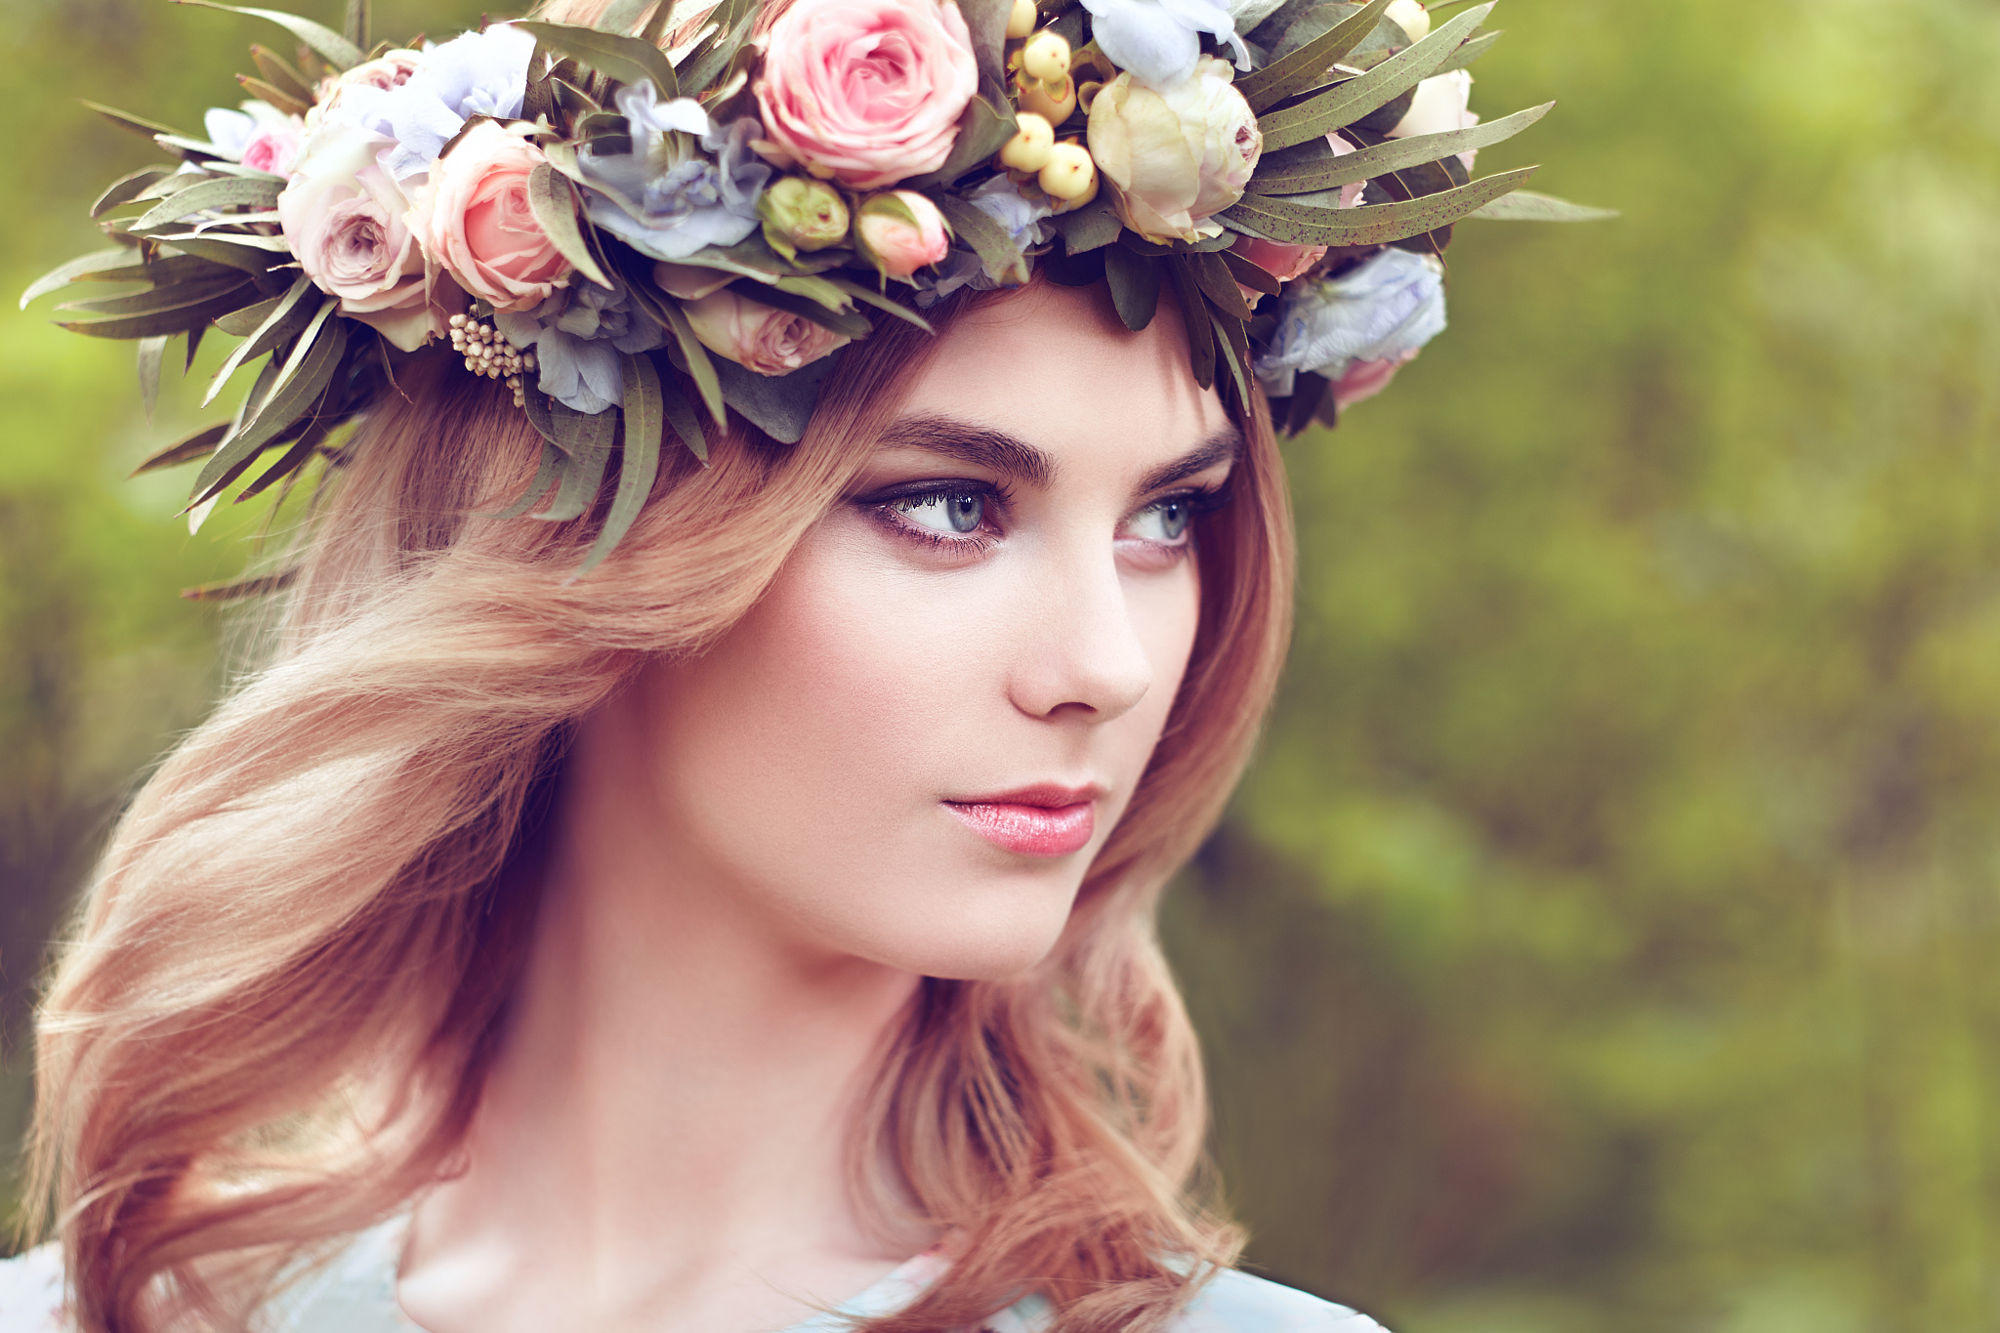 Beautiful blonde woman with flower wreath on her head